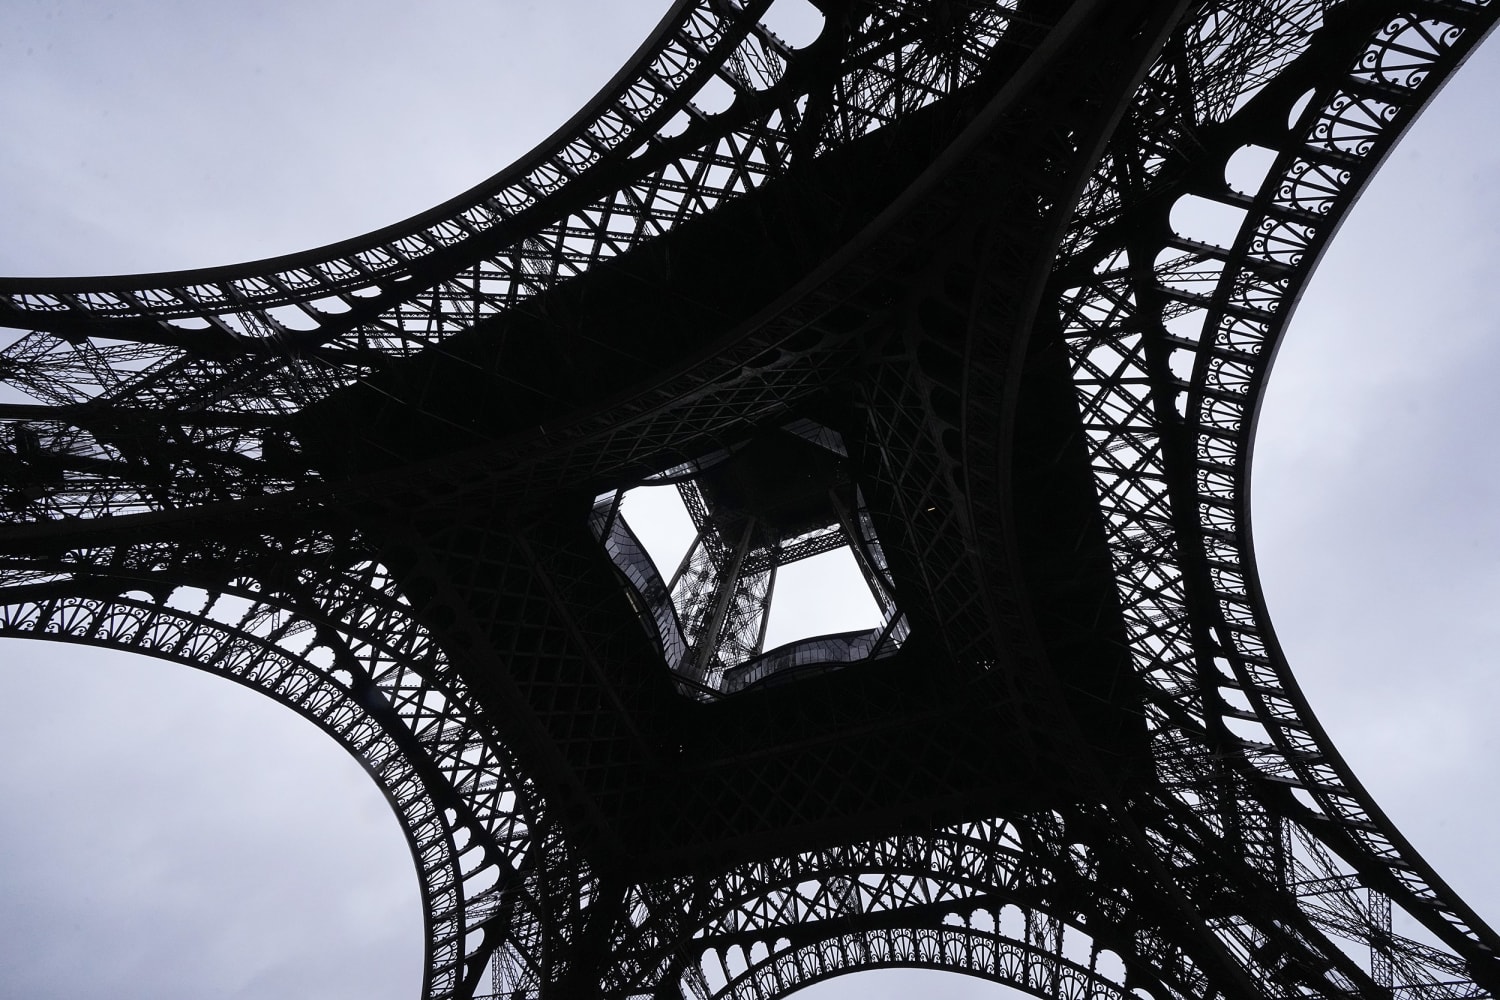 The man who built the Eiffel Tower with 700,000 matchsticks has a world record after all